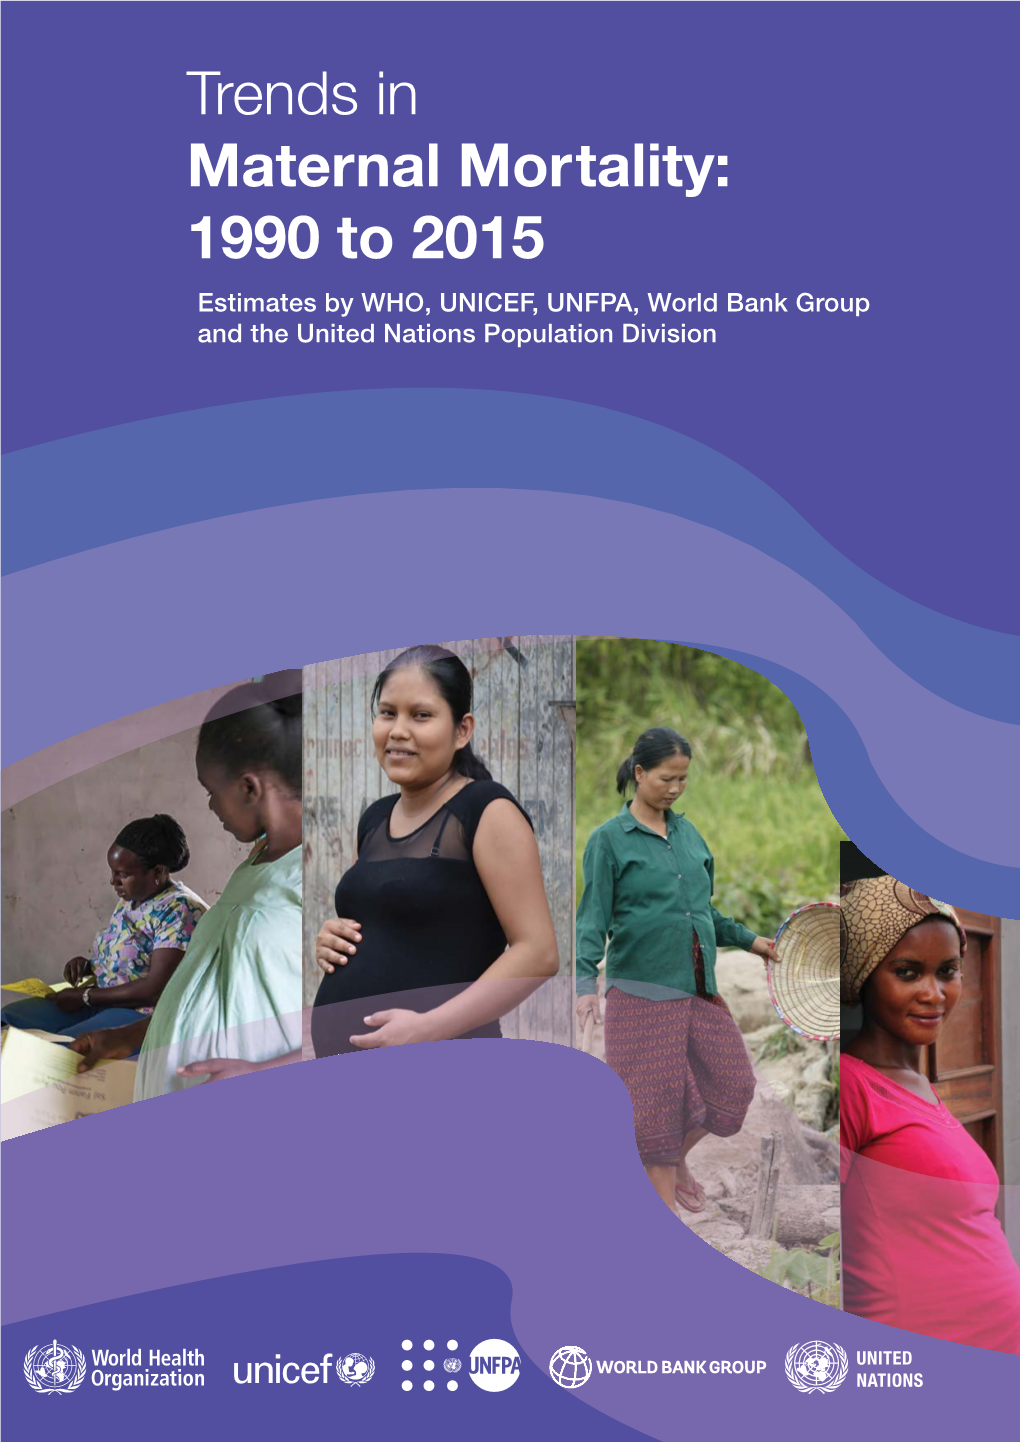 Trends in Maternal Mortality: 1990 to 2015 Estimates by WHO, UNICEF, UNFPA, World Bank Group and the United Nations Population Division